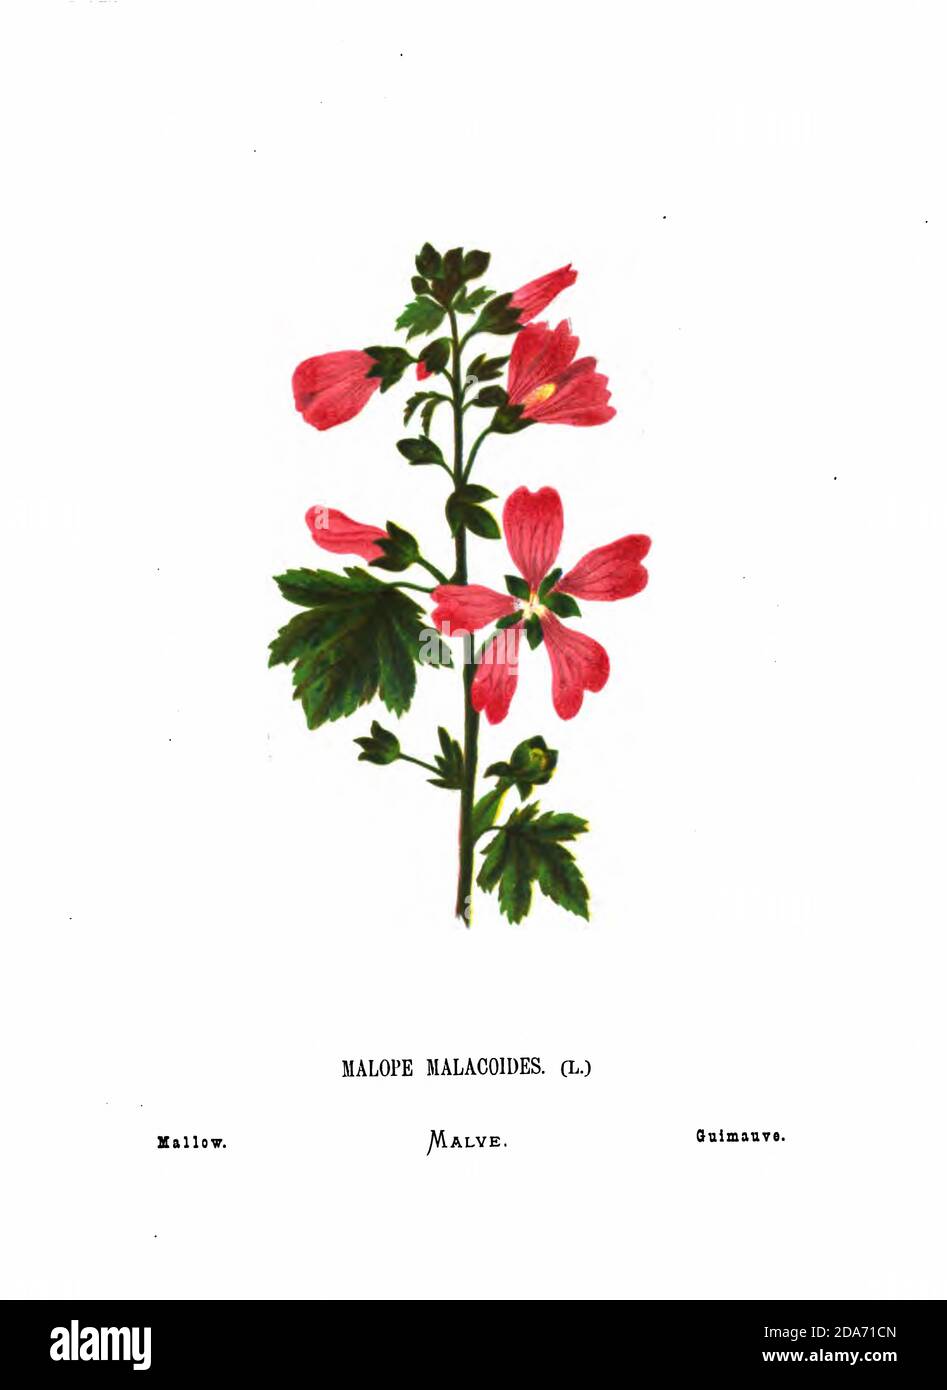 Mallow (Malope malacoides) From the book Wild flowers of the Holy Land: Fifty-Four Plates Printed In Colours, Drawn And Painted After Nature. by Mrs. Hannah Zeller, (Gobat); Tristram, H. B. (Henry Baker), and Edward Atkinson, Published in London by James Nisbet & Co 1876 on white background Stock Photo